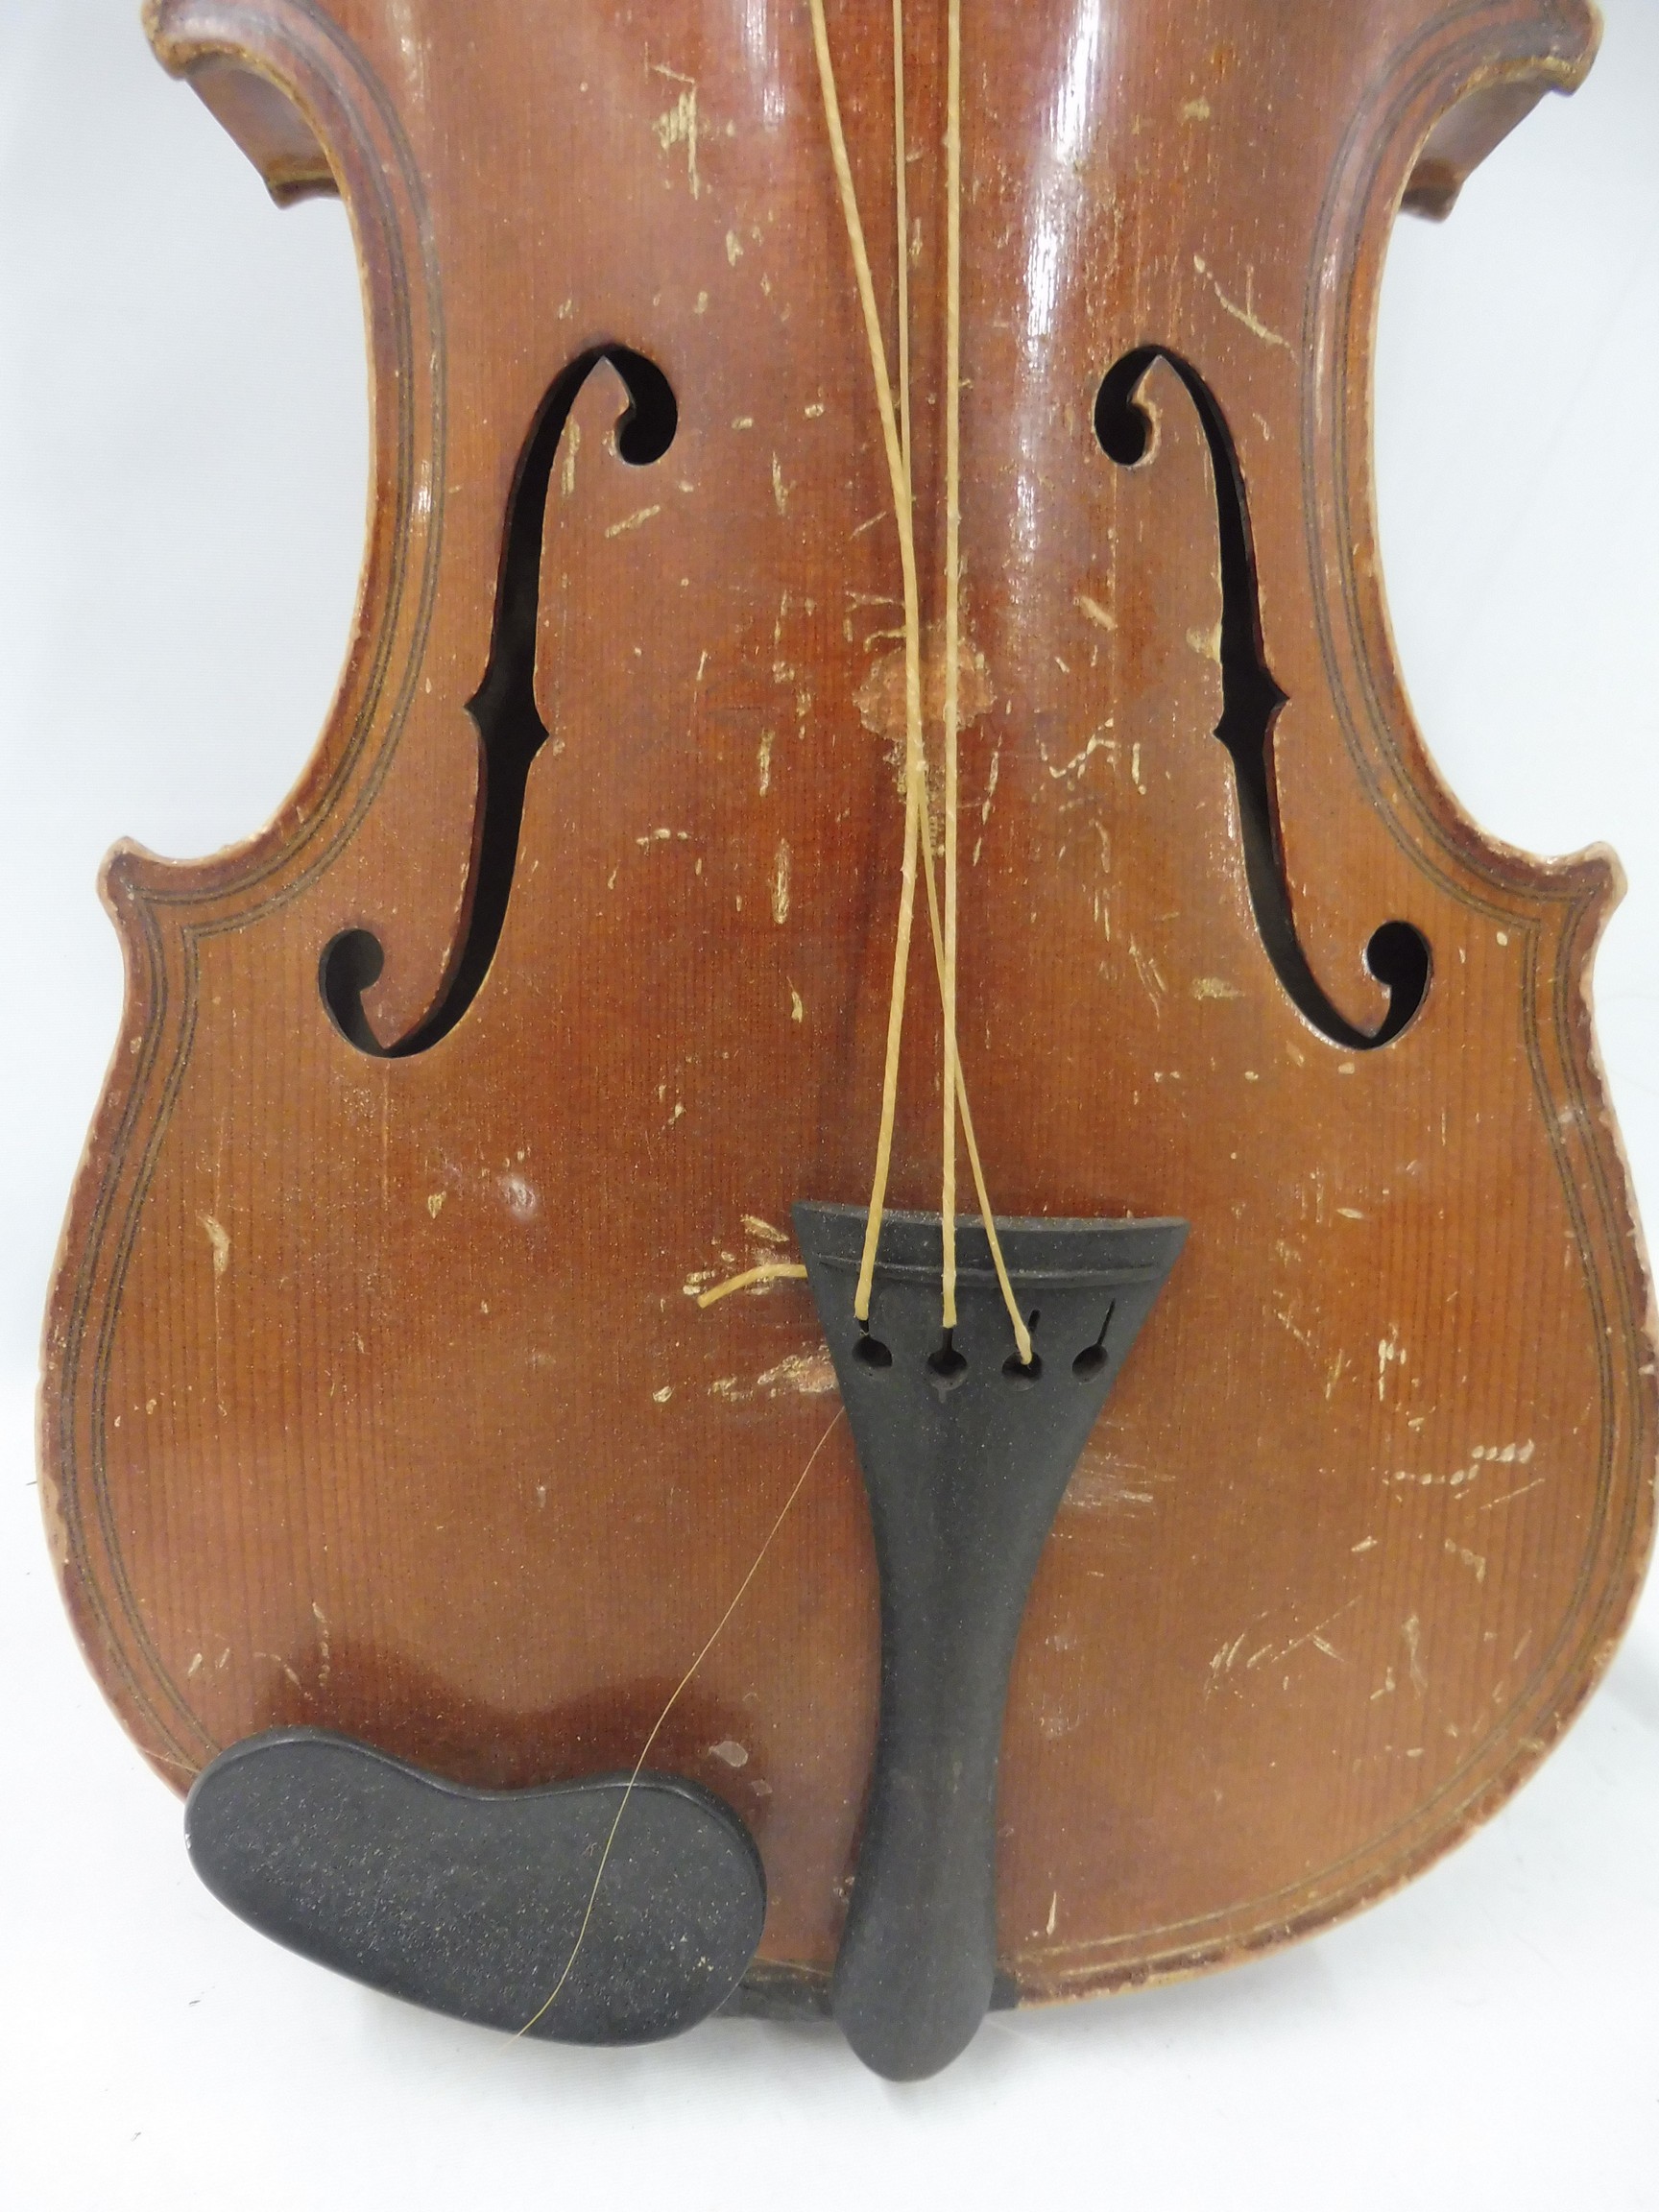 A cased old violin and bow for restoration. - Image 5 of 12